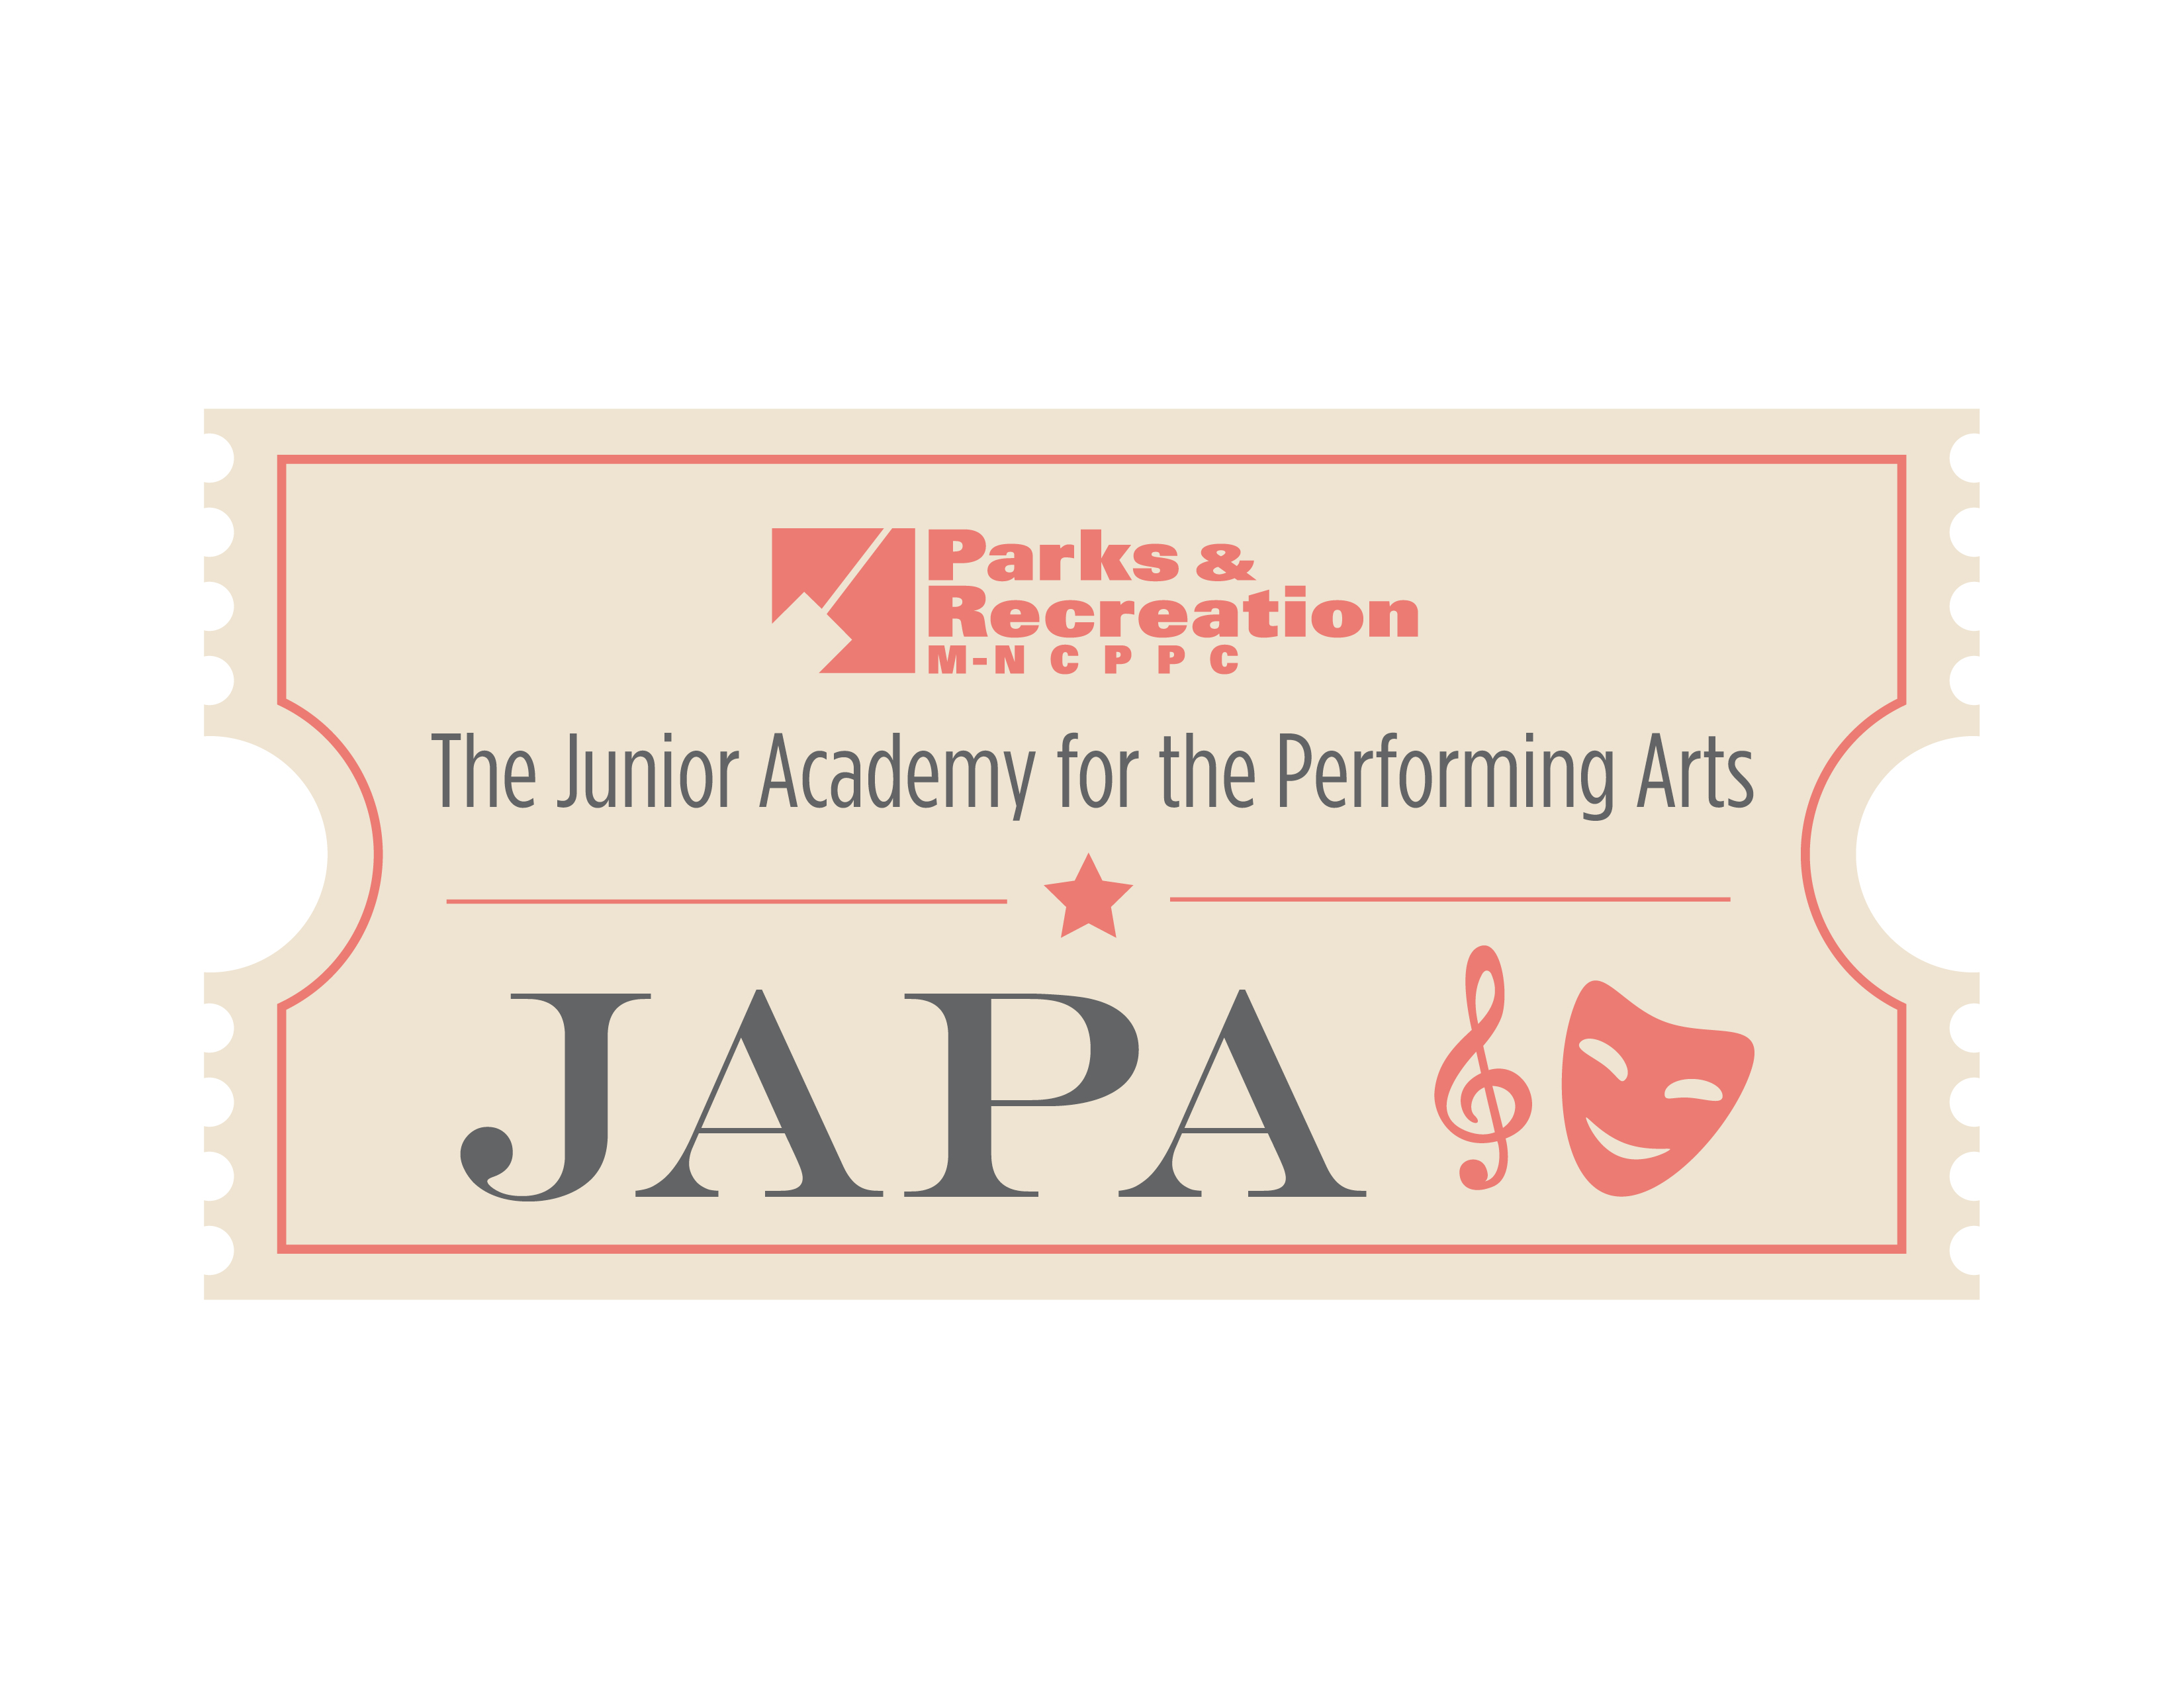 The Junior Academy for the Performing Arts